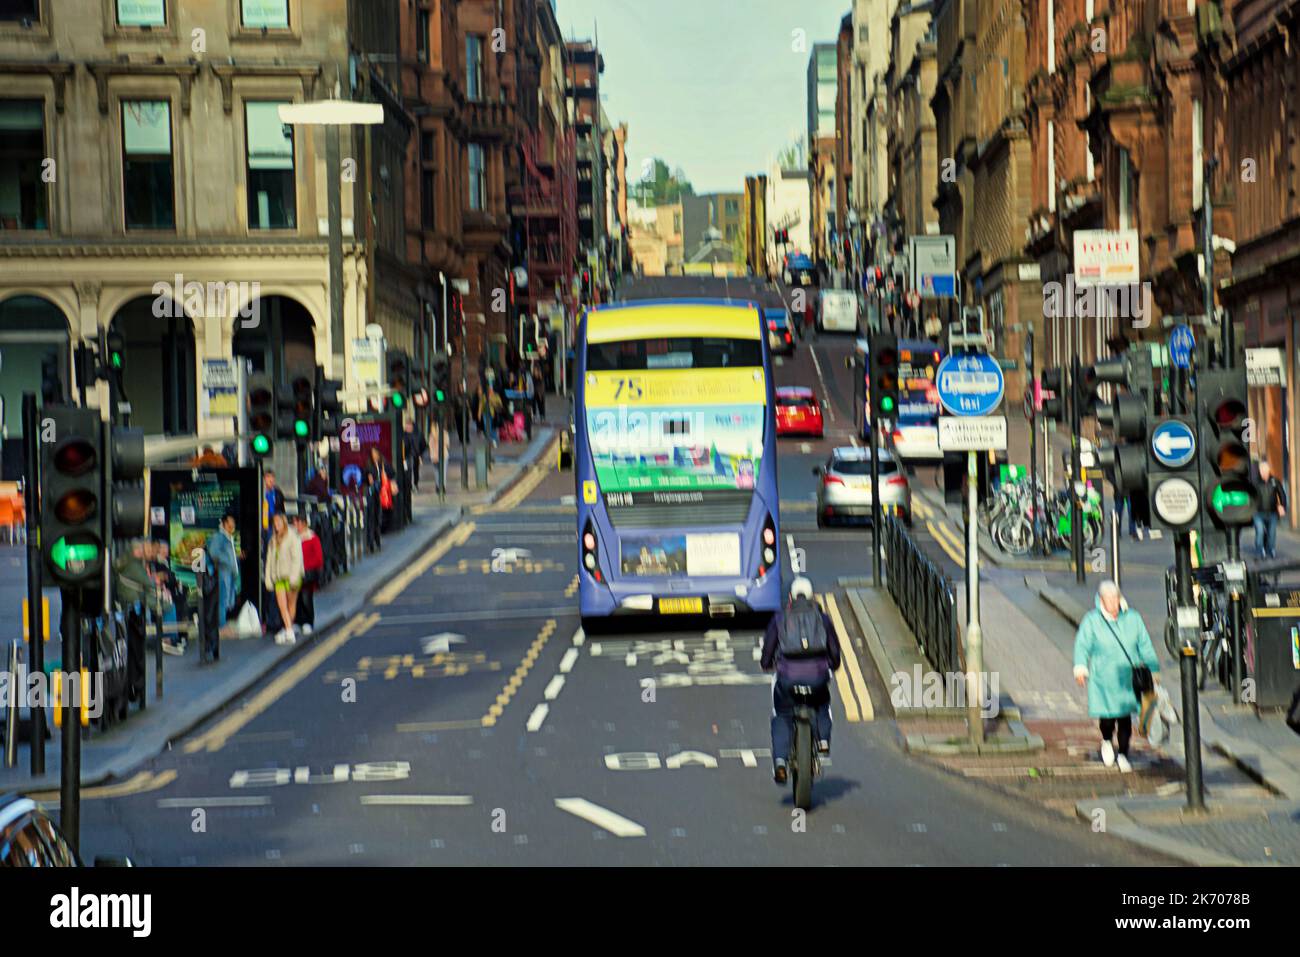 Bus stafe centre on hope street is the most polluted road in the city famous for its traffic and bus lanes with subsequent record pollution levels Stock Photo